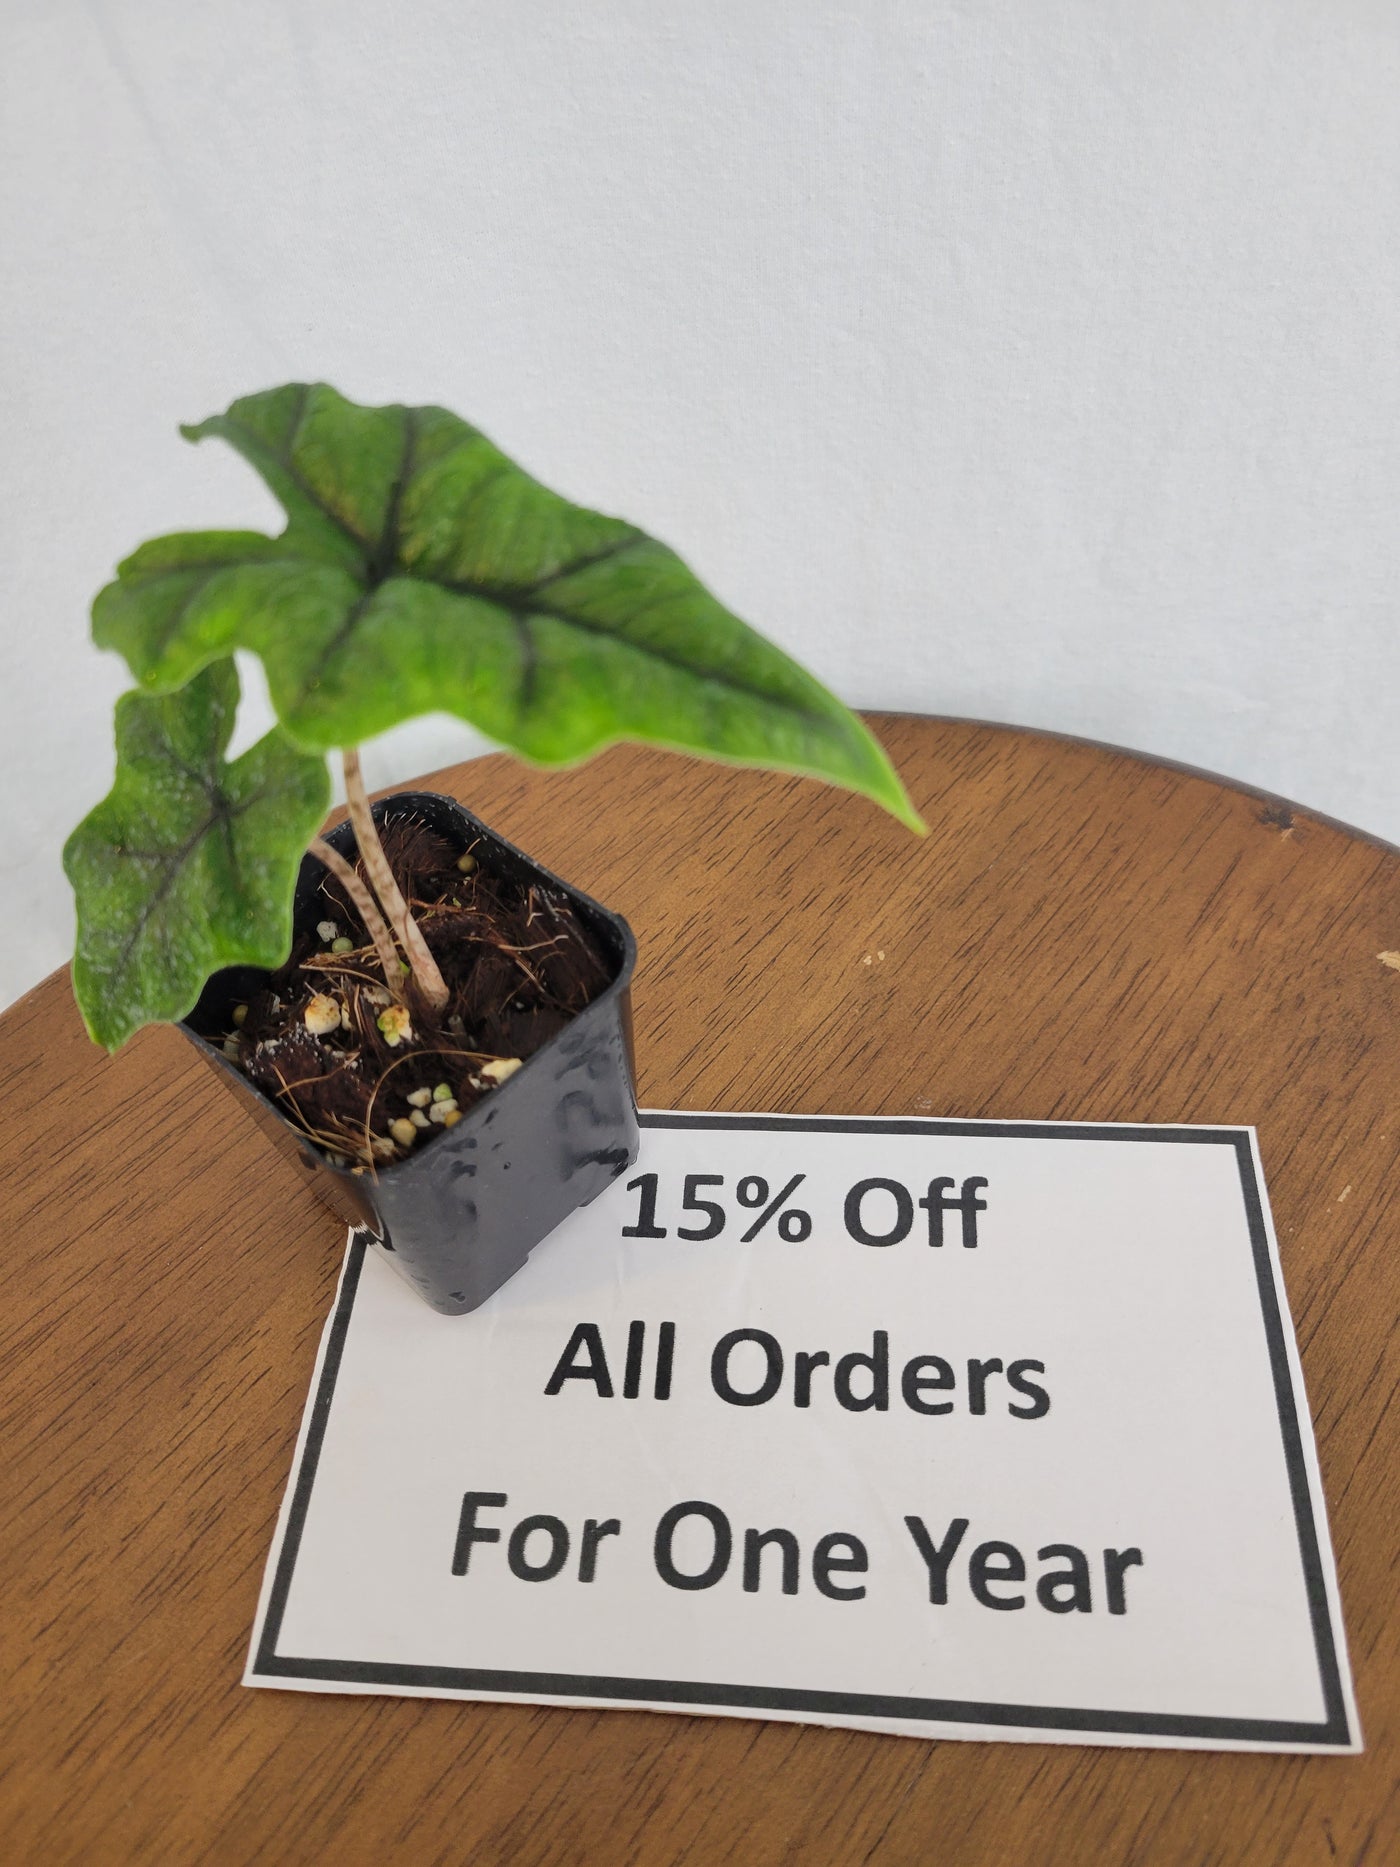 15% Off All Orders For 1 Year